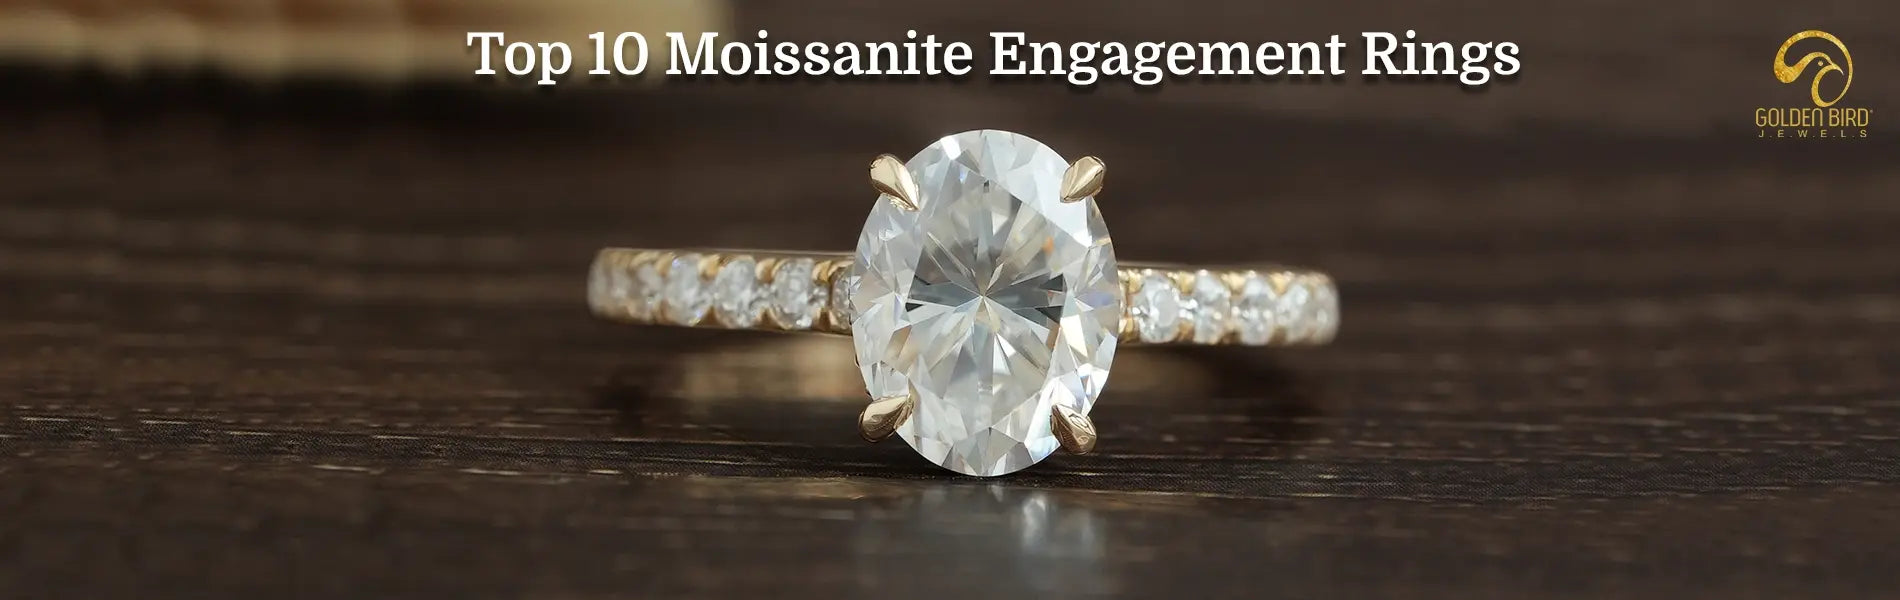 Moissanite engagement rings for women to shop in gold and platinum